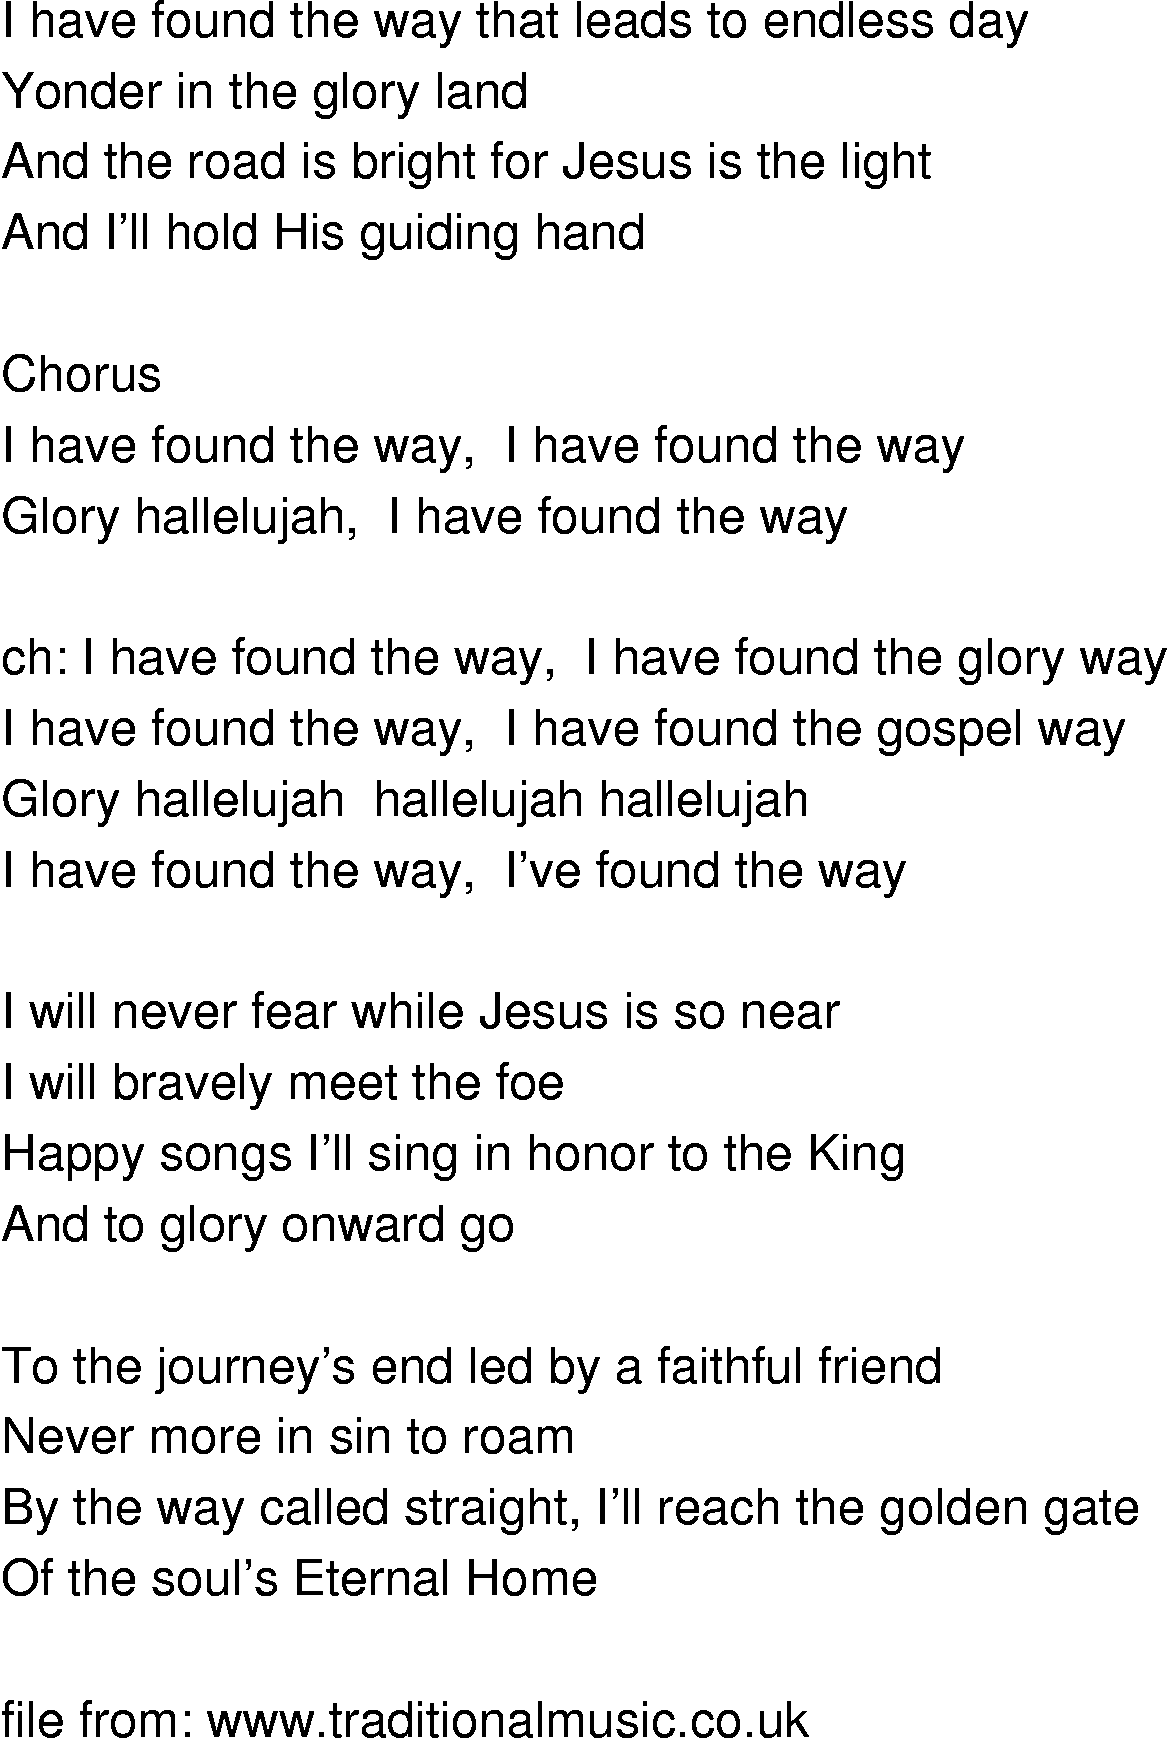 Old-Time Song Lyrics - I Have Found The Way